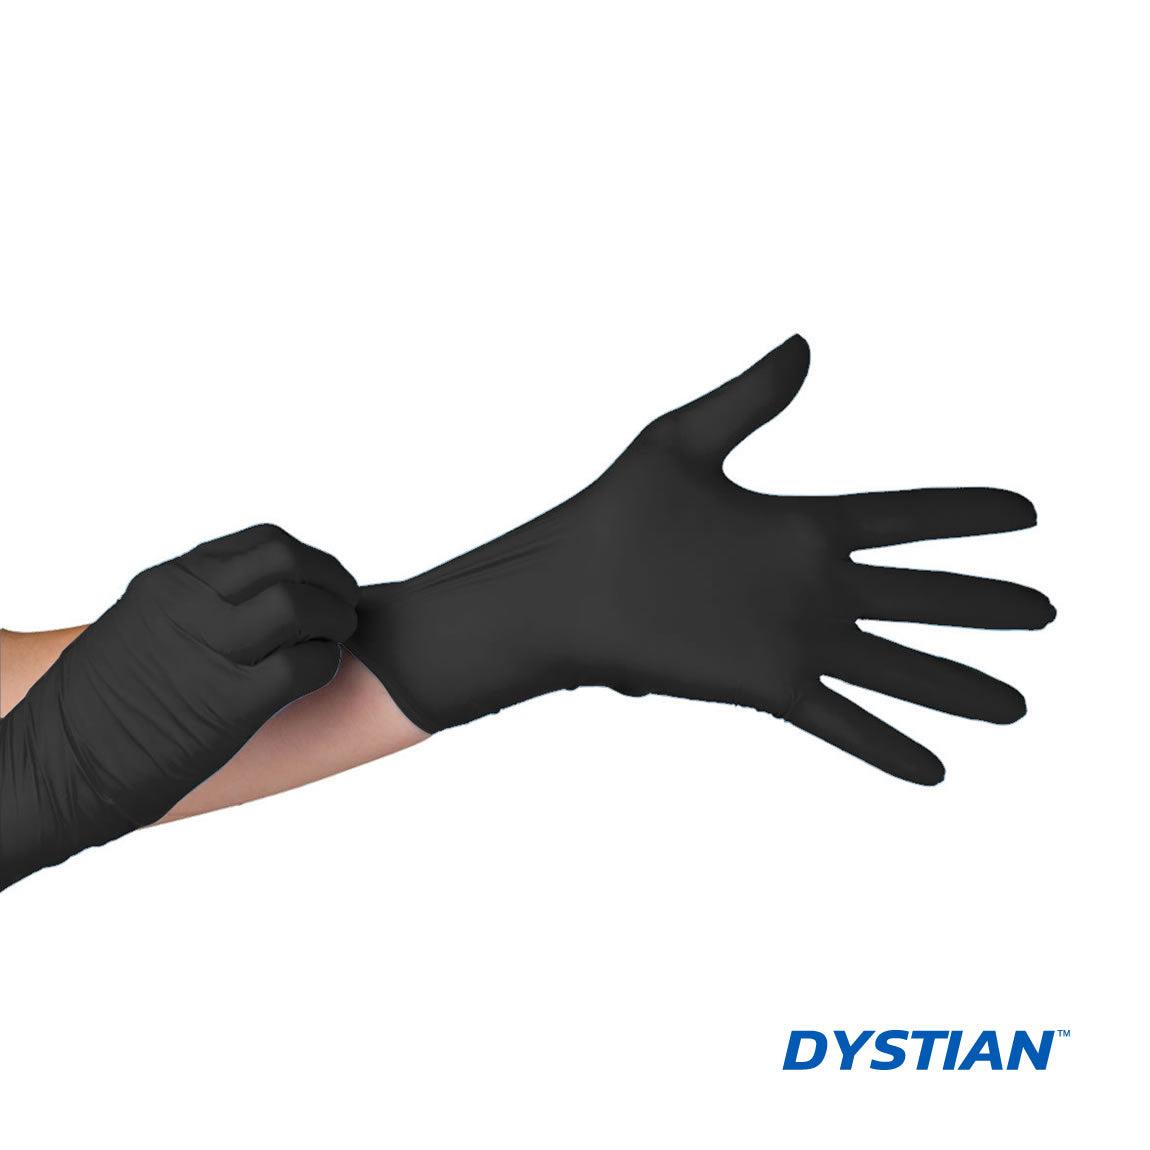 Dystian Nitrile Gloves - Glove - FYT Tattoo Supplies Canada